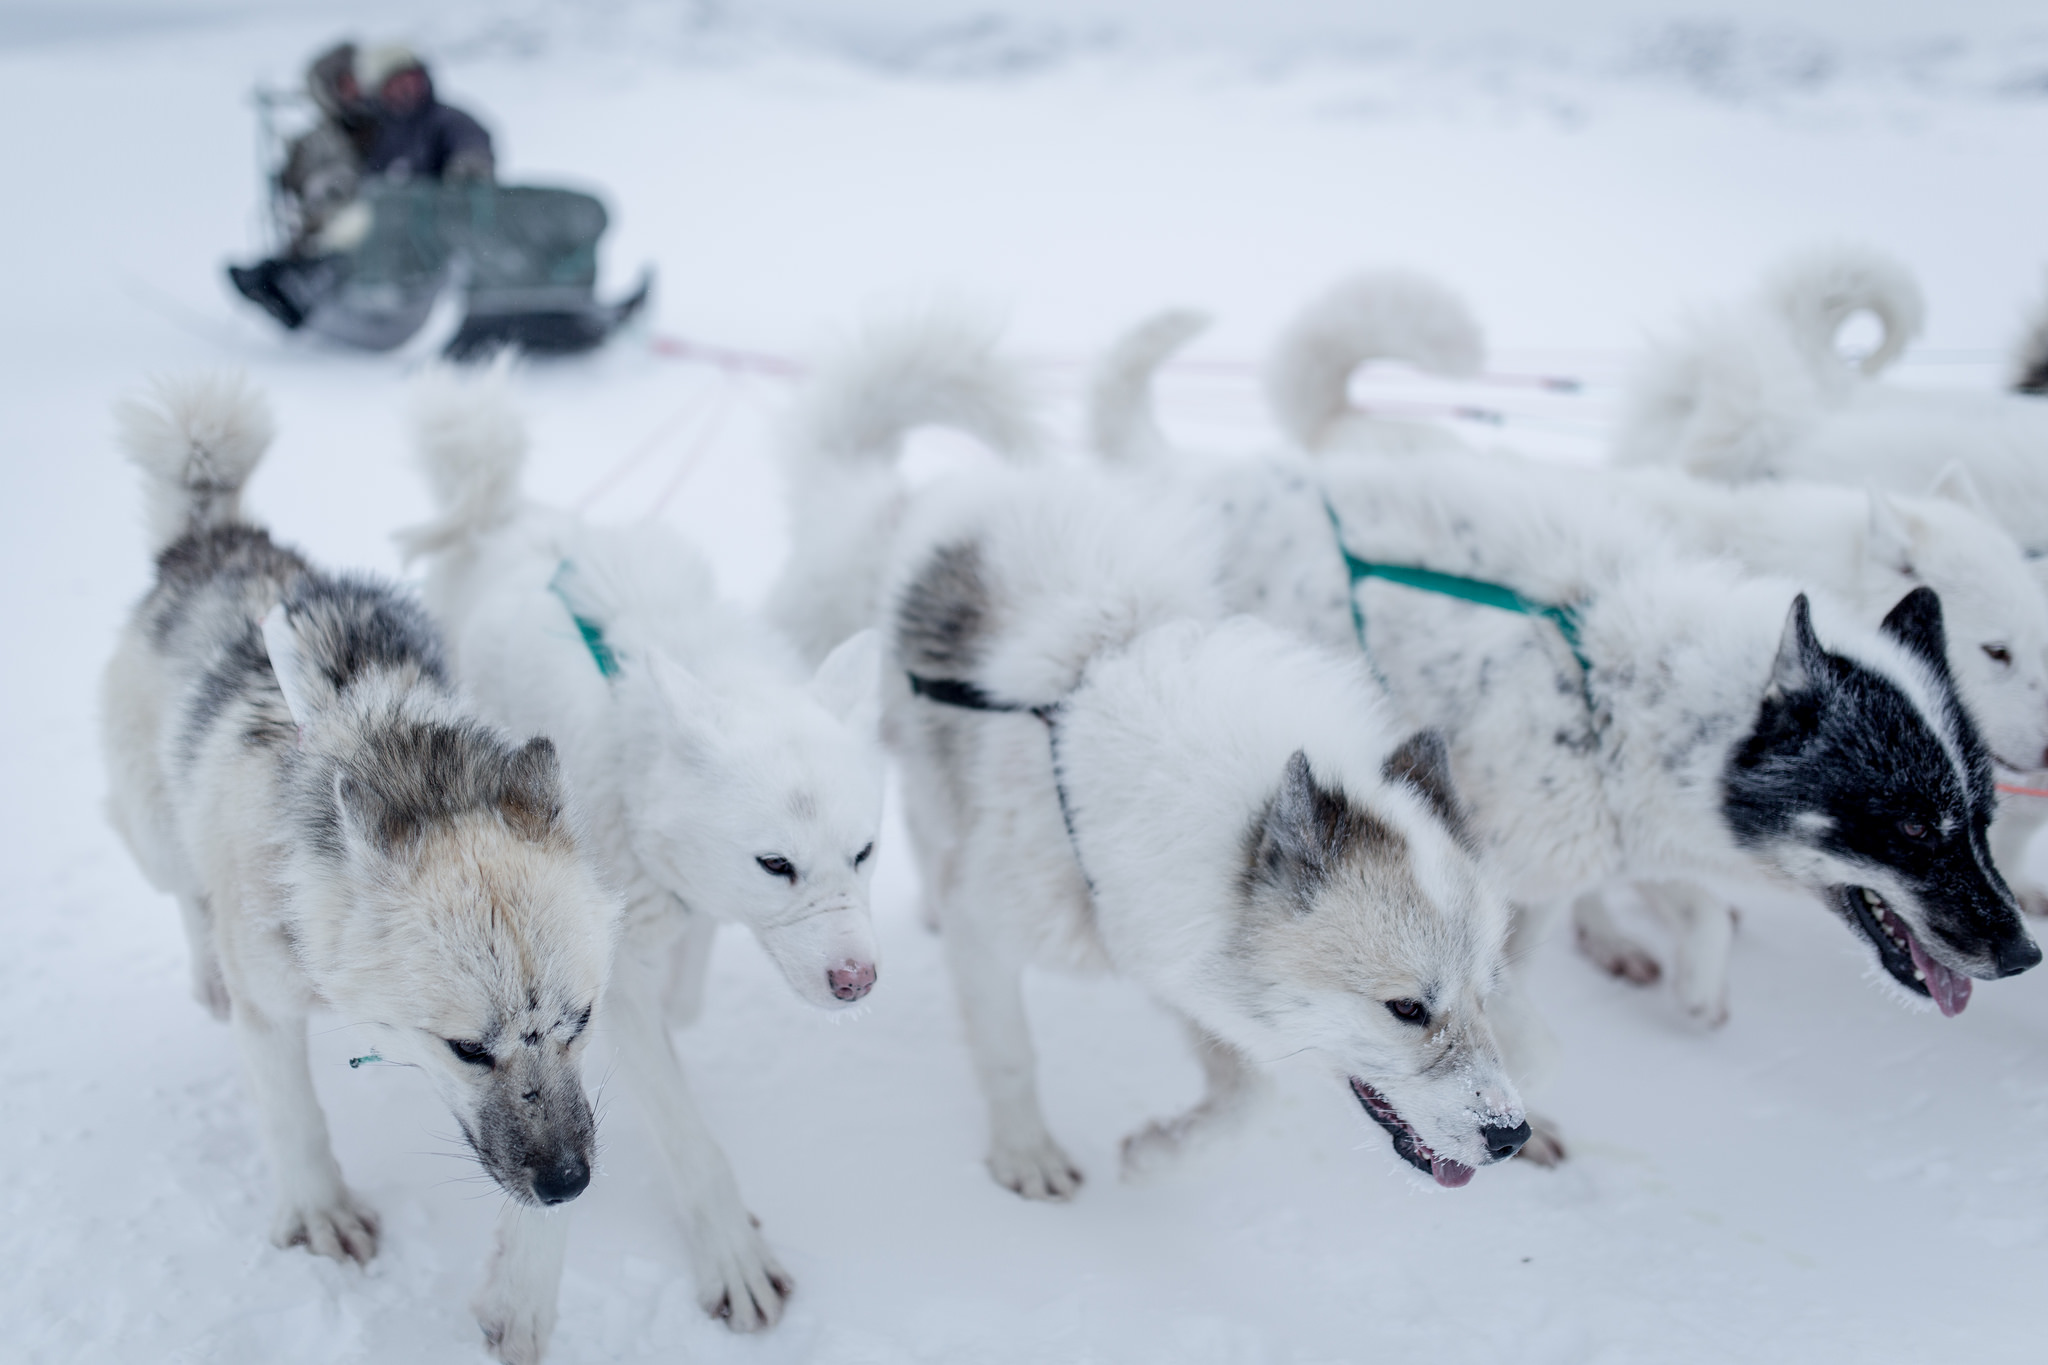 https://thefourthcontinent.files.wordpress.com/2015/04/fourthcontinent-greenland-dogsledding-madspihl5.jpg